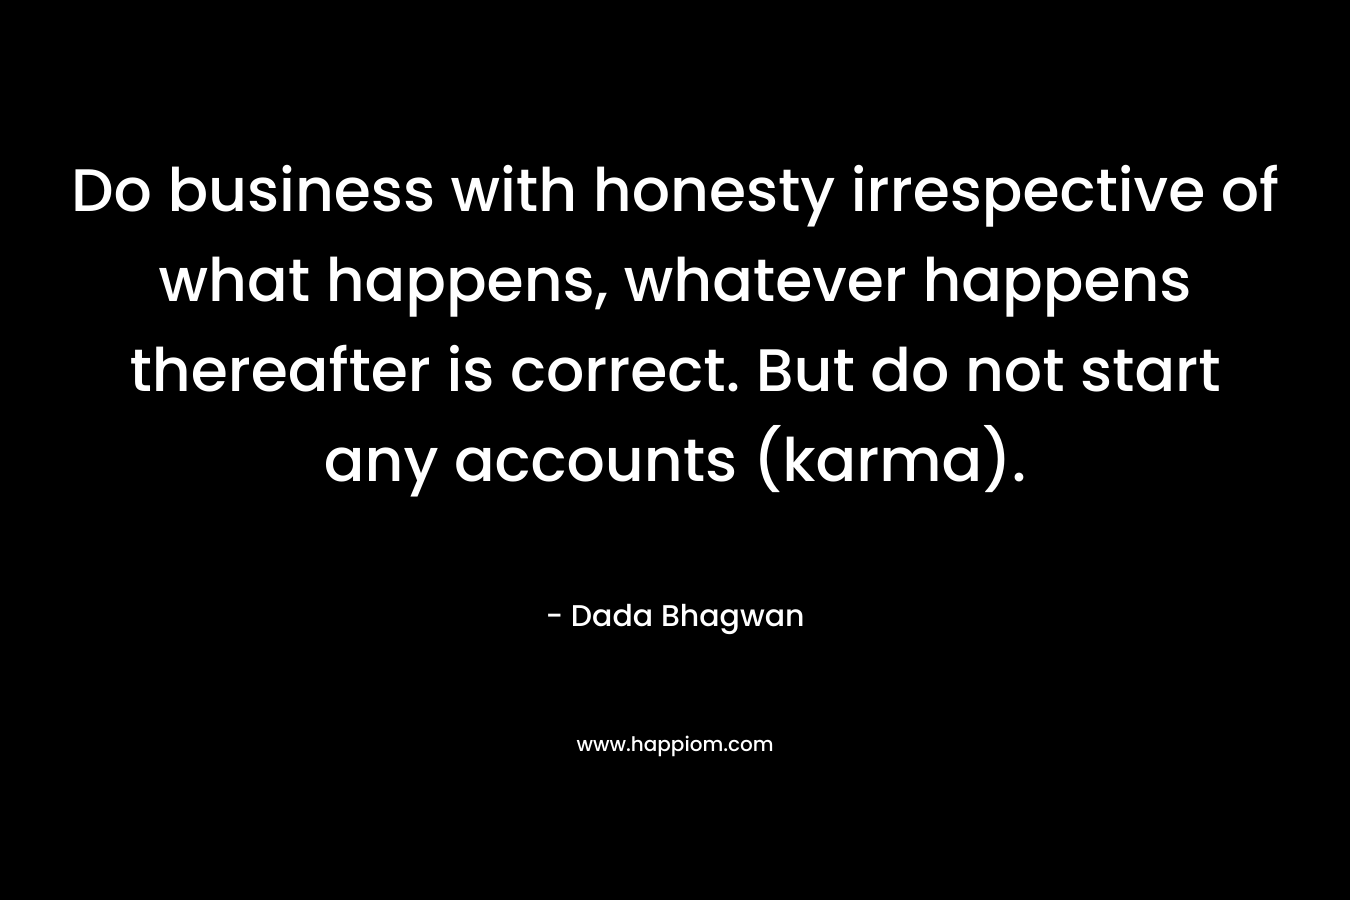 Do business with honesty irrespective of what happens, whatever happens thereafter is correct. But do not start any accounts (karma). – Dada Bhagwan